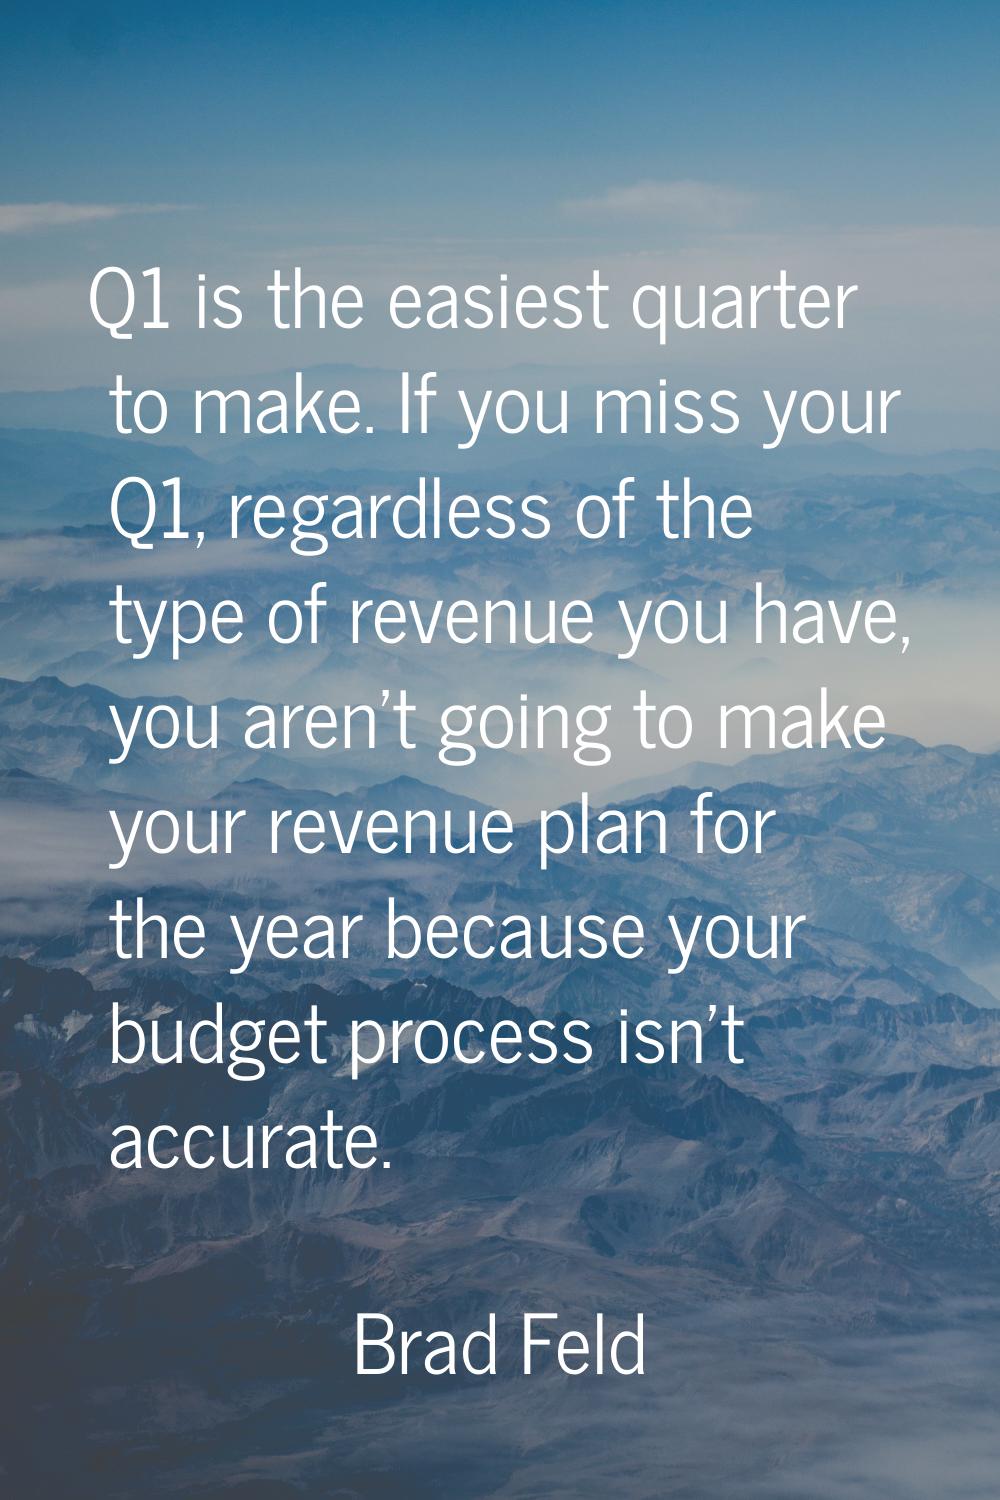 Q1 is the easiest quarter to make. If you miss your Q1, regardless of the type of revenue you have,